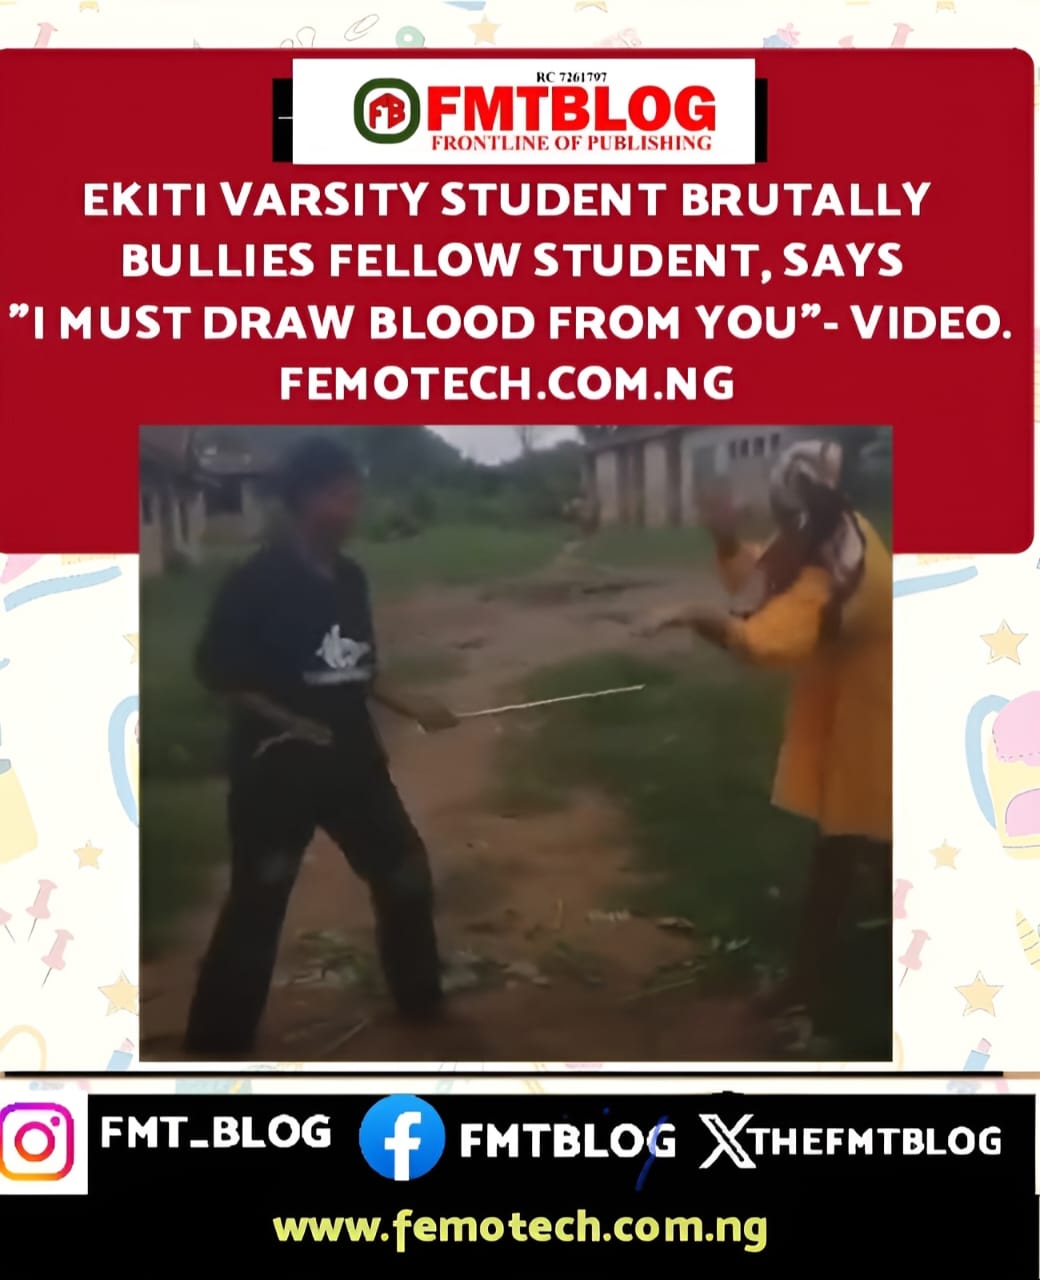 Ekiti Varsity Student Brutally Bullies Fellow Student. Says ”I Must Draw Blood From You”(VIDEO)